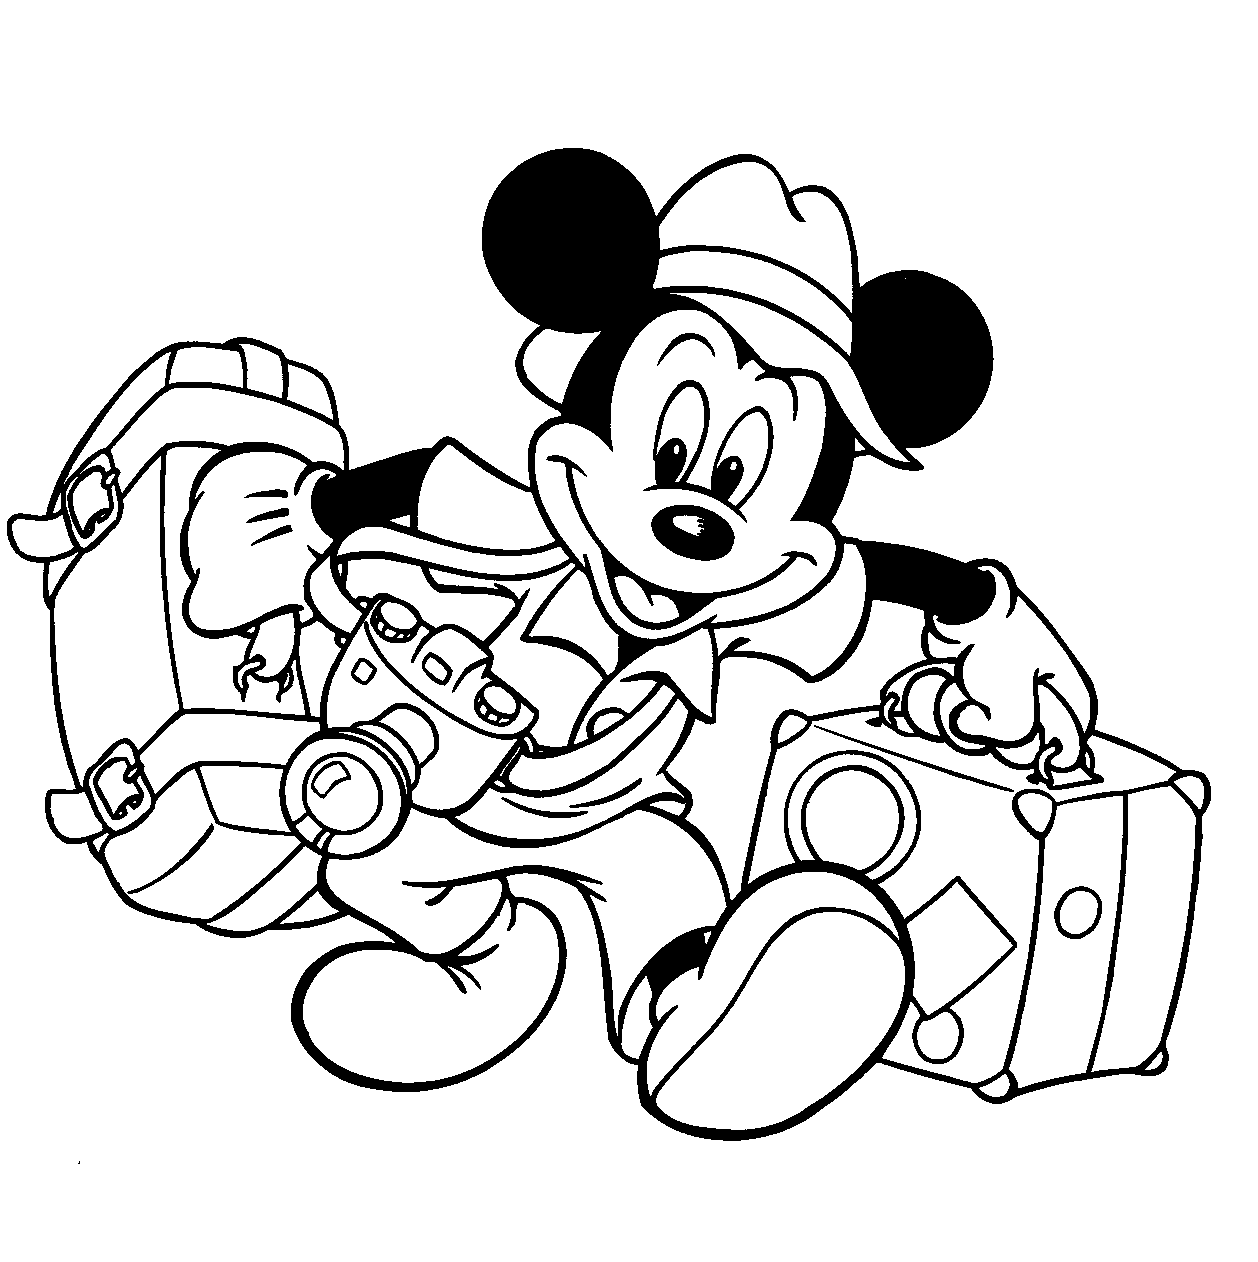 Mickey Mouse Clipart Black And White   Clipart Panda   Free Clipart